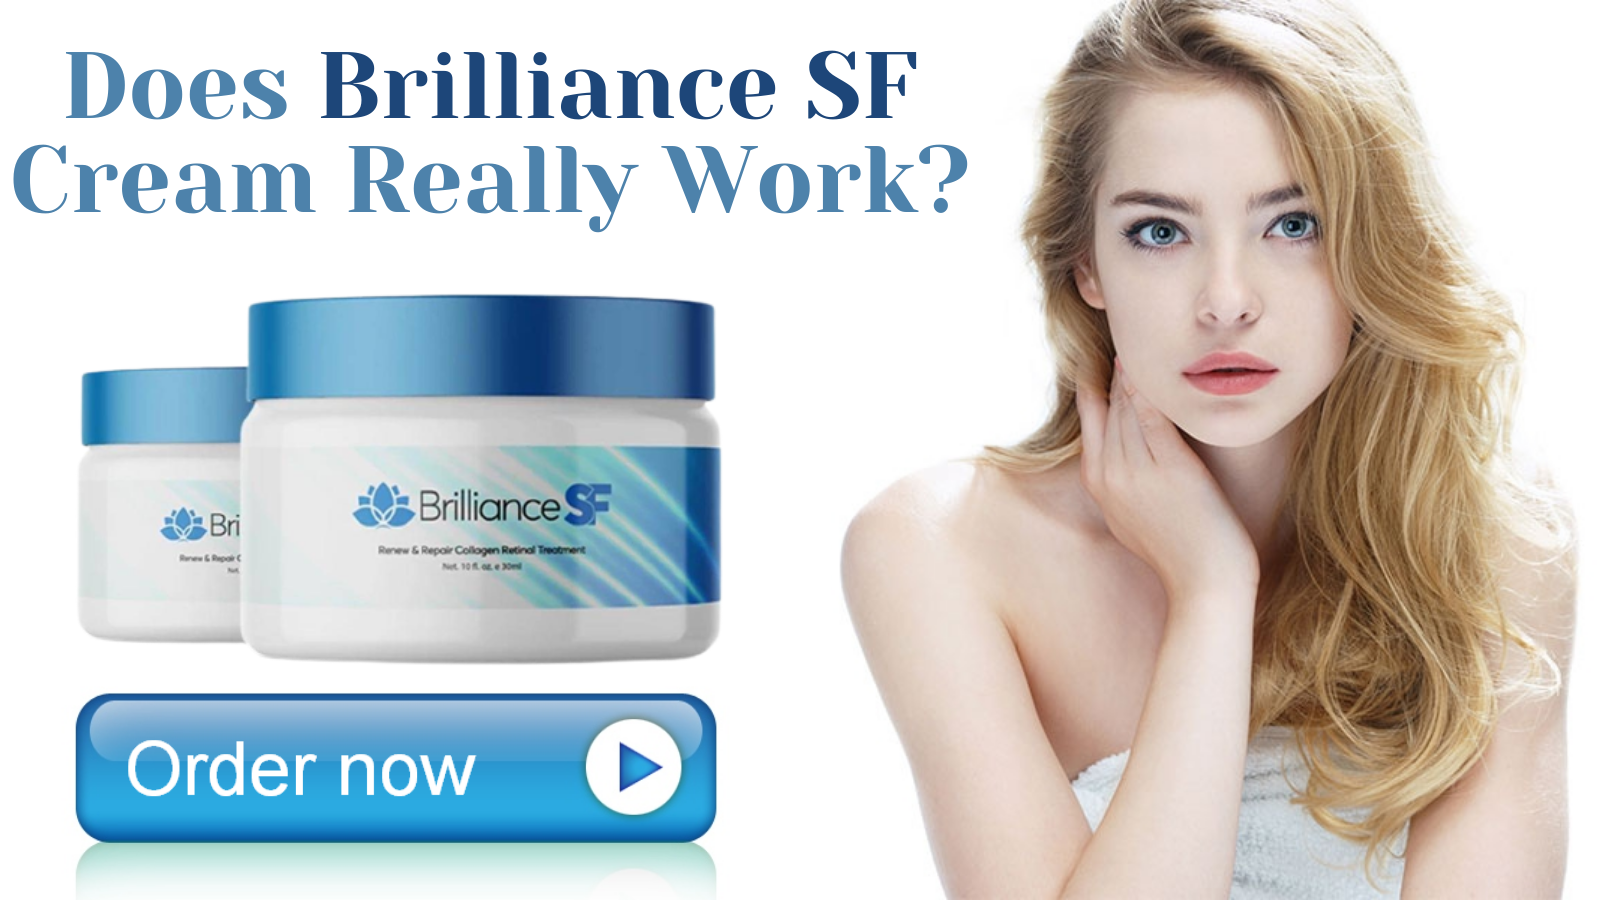 Article about Brilliance SF Anti Aging Cream Safe To Use